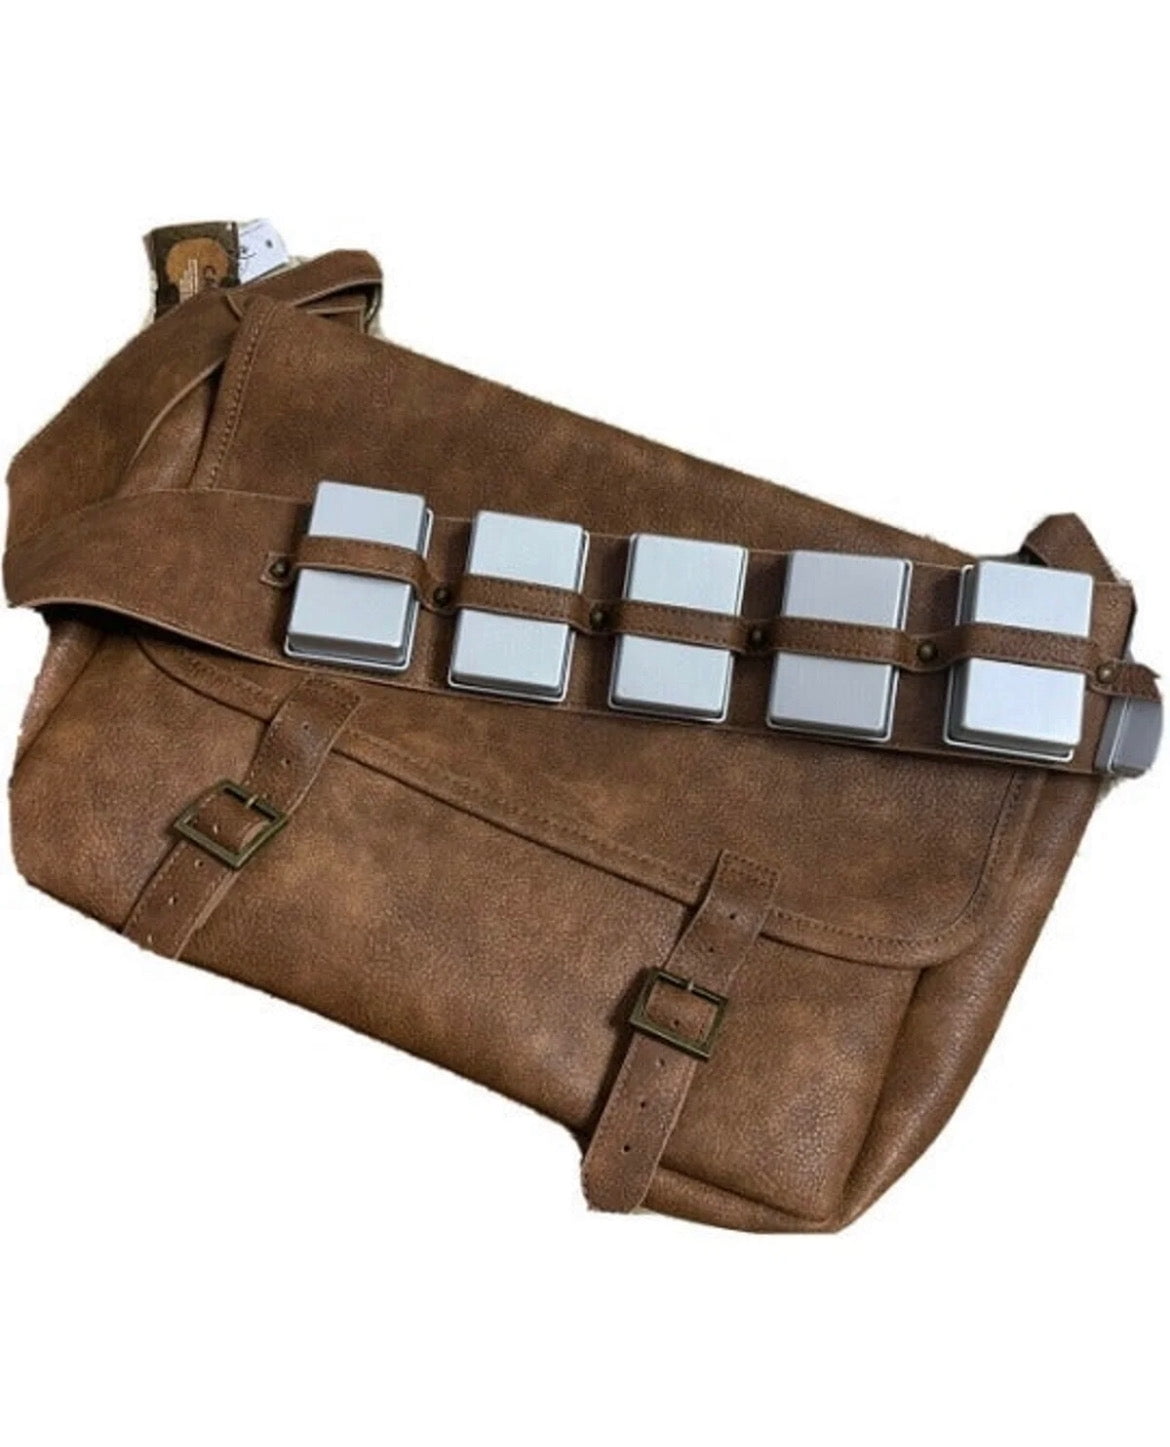 Star Wars small size shoulder bolso/Messenger Bag han Solo y Chewbacca 